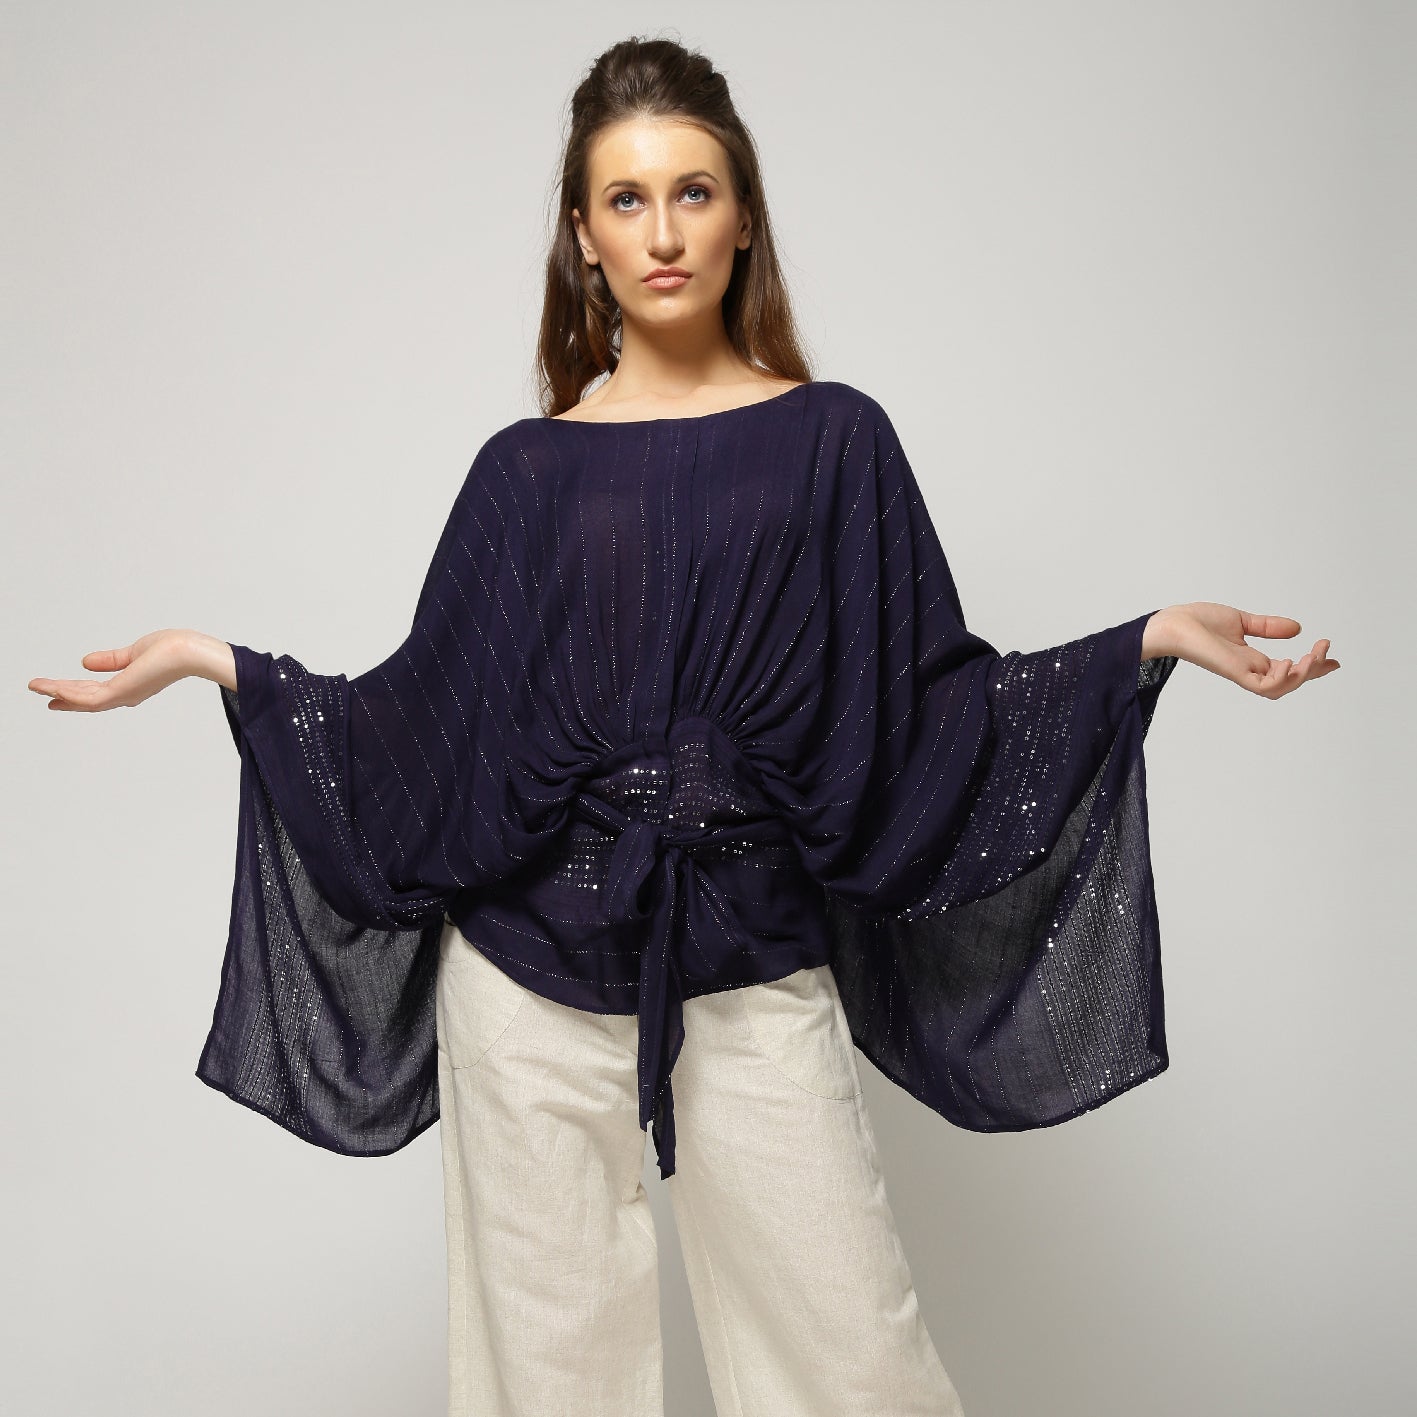 Shynah Cape Top - Navy Blue Sequin - O Layla